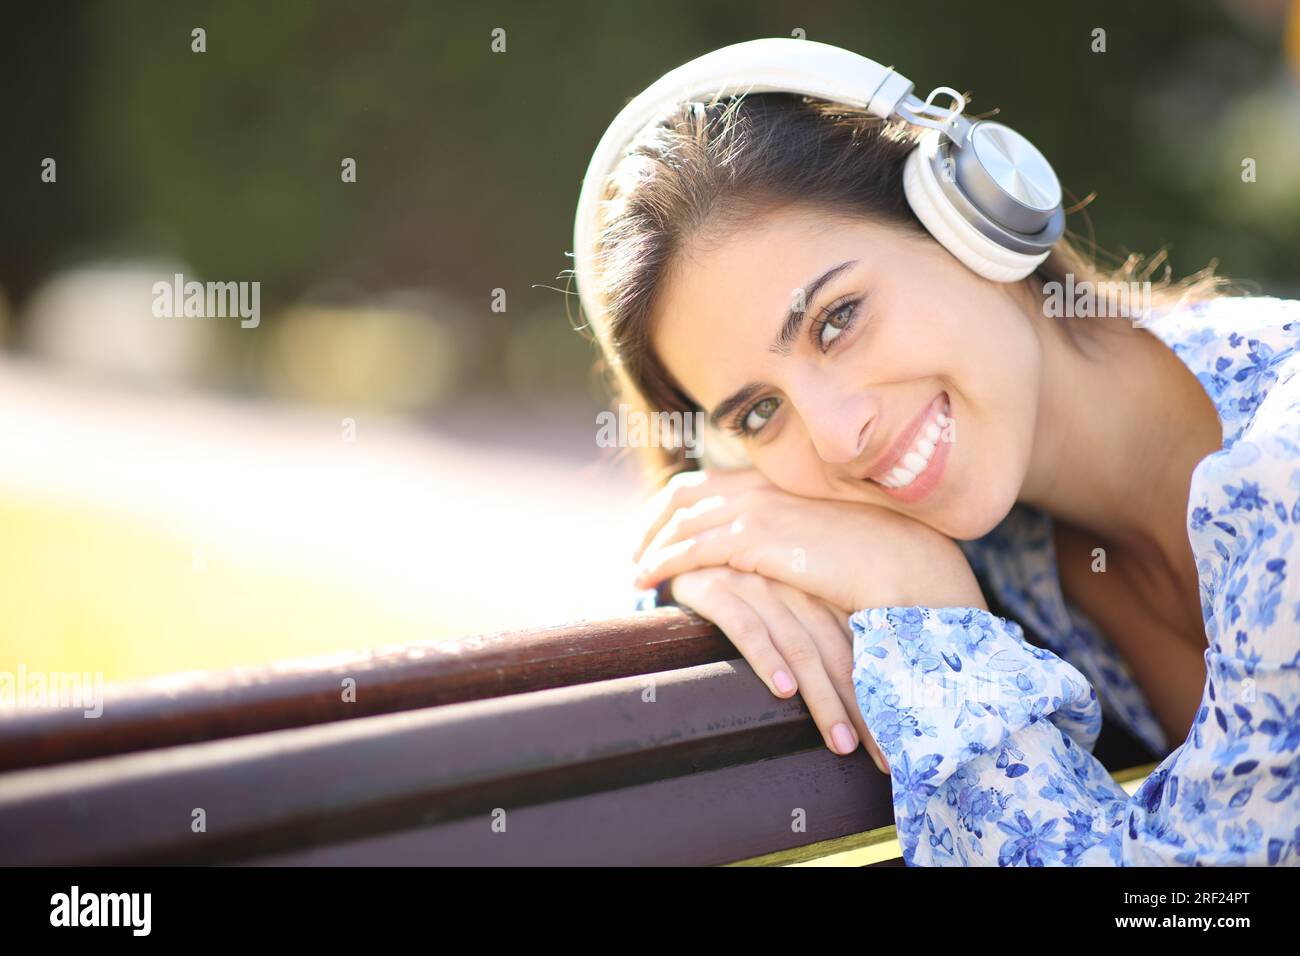 Beautiful portrait of a woman wearing headphone on a bench in a park looking at you Stock Photo